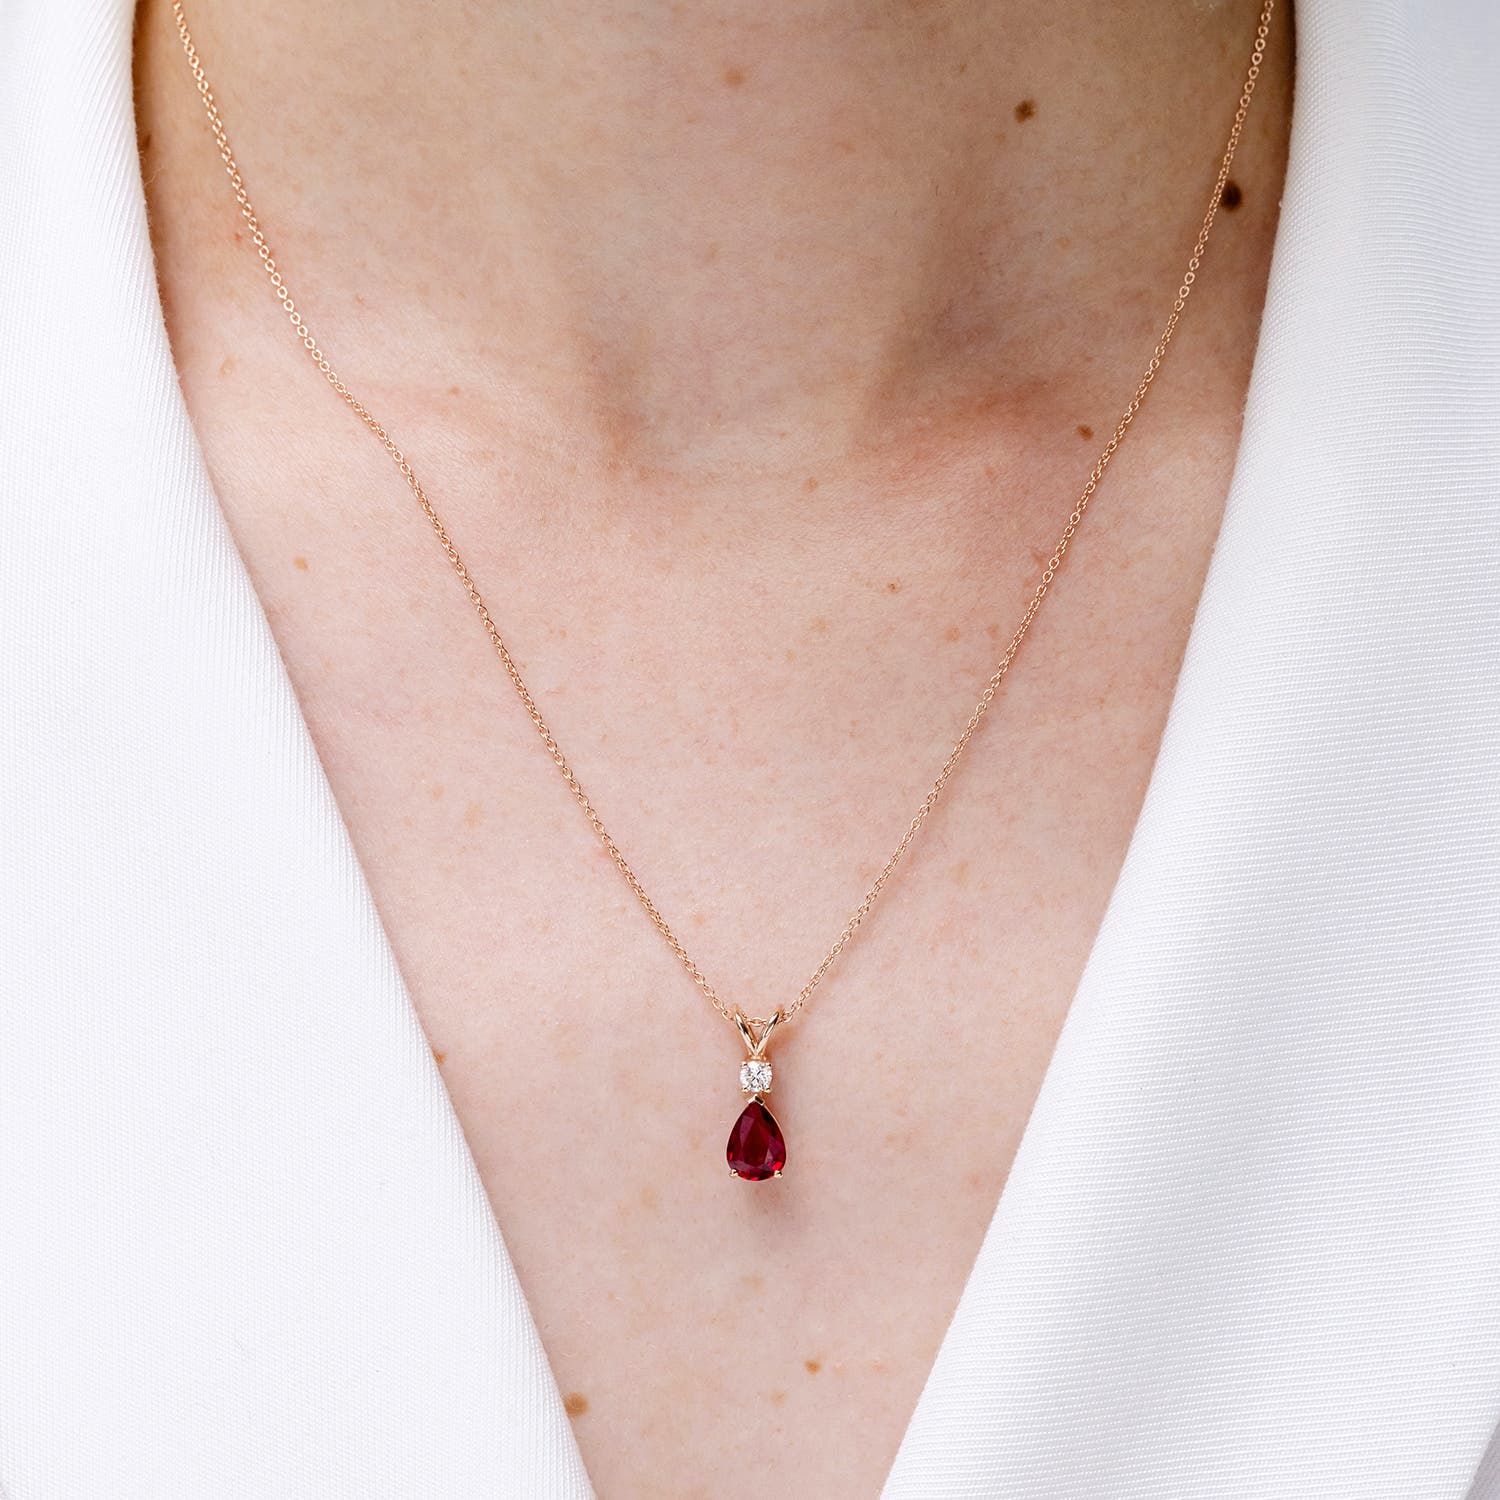 Unique 6x4MM Oval Shaped Red Ruby Pendant in 14k Solid Gold